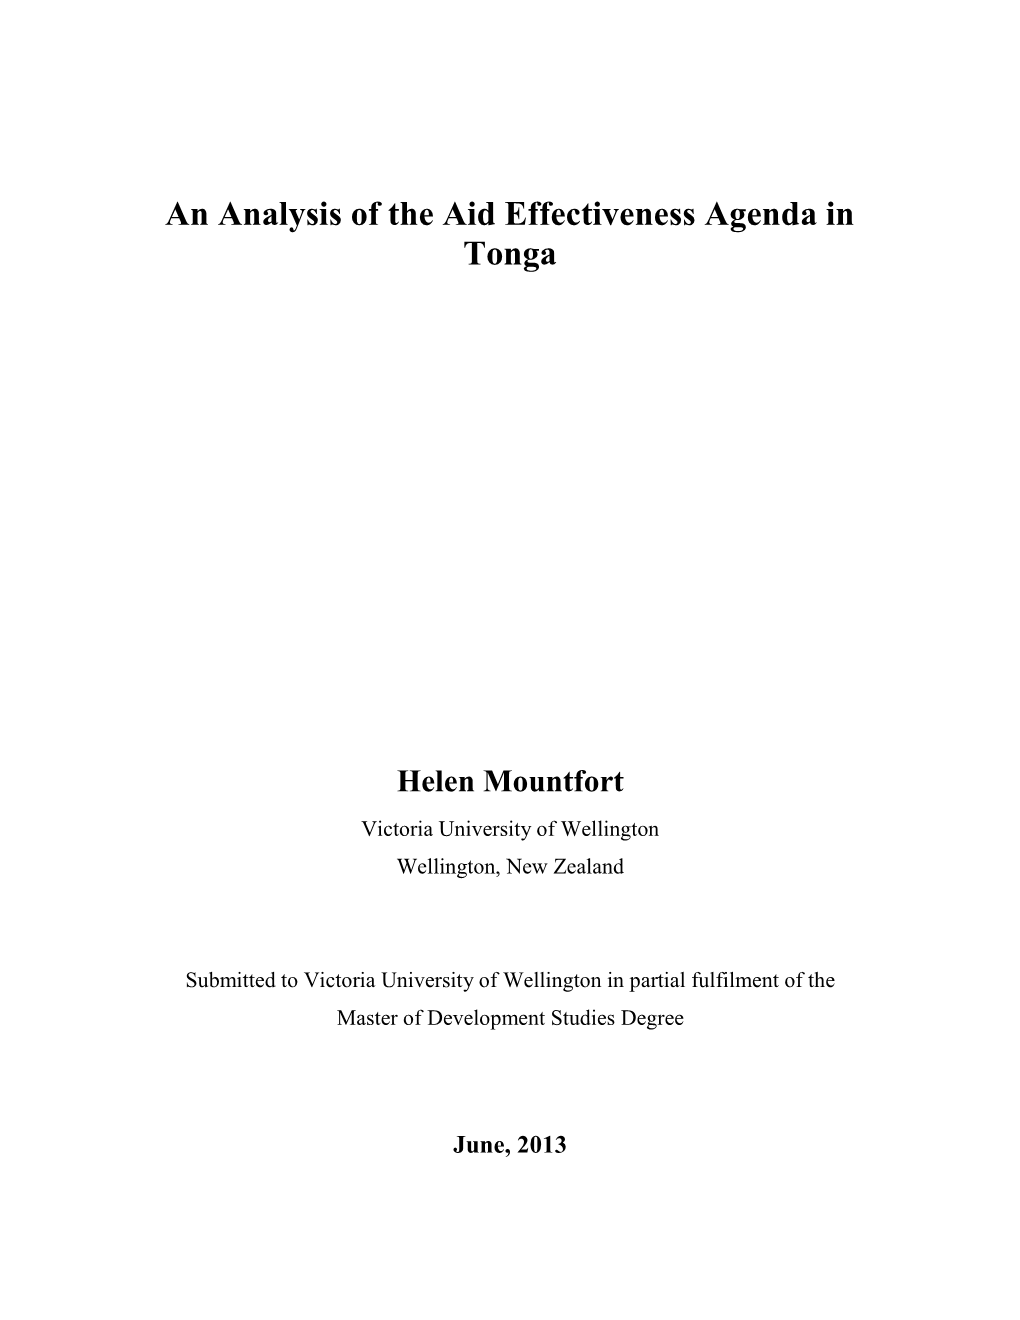 An Analysis of the Aid Effectiveness Agenda in Tonga